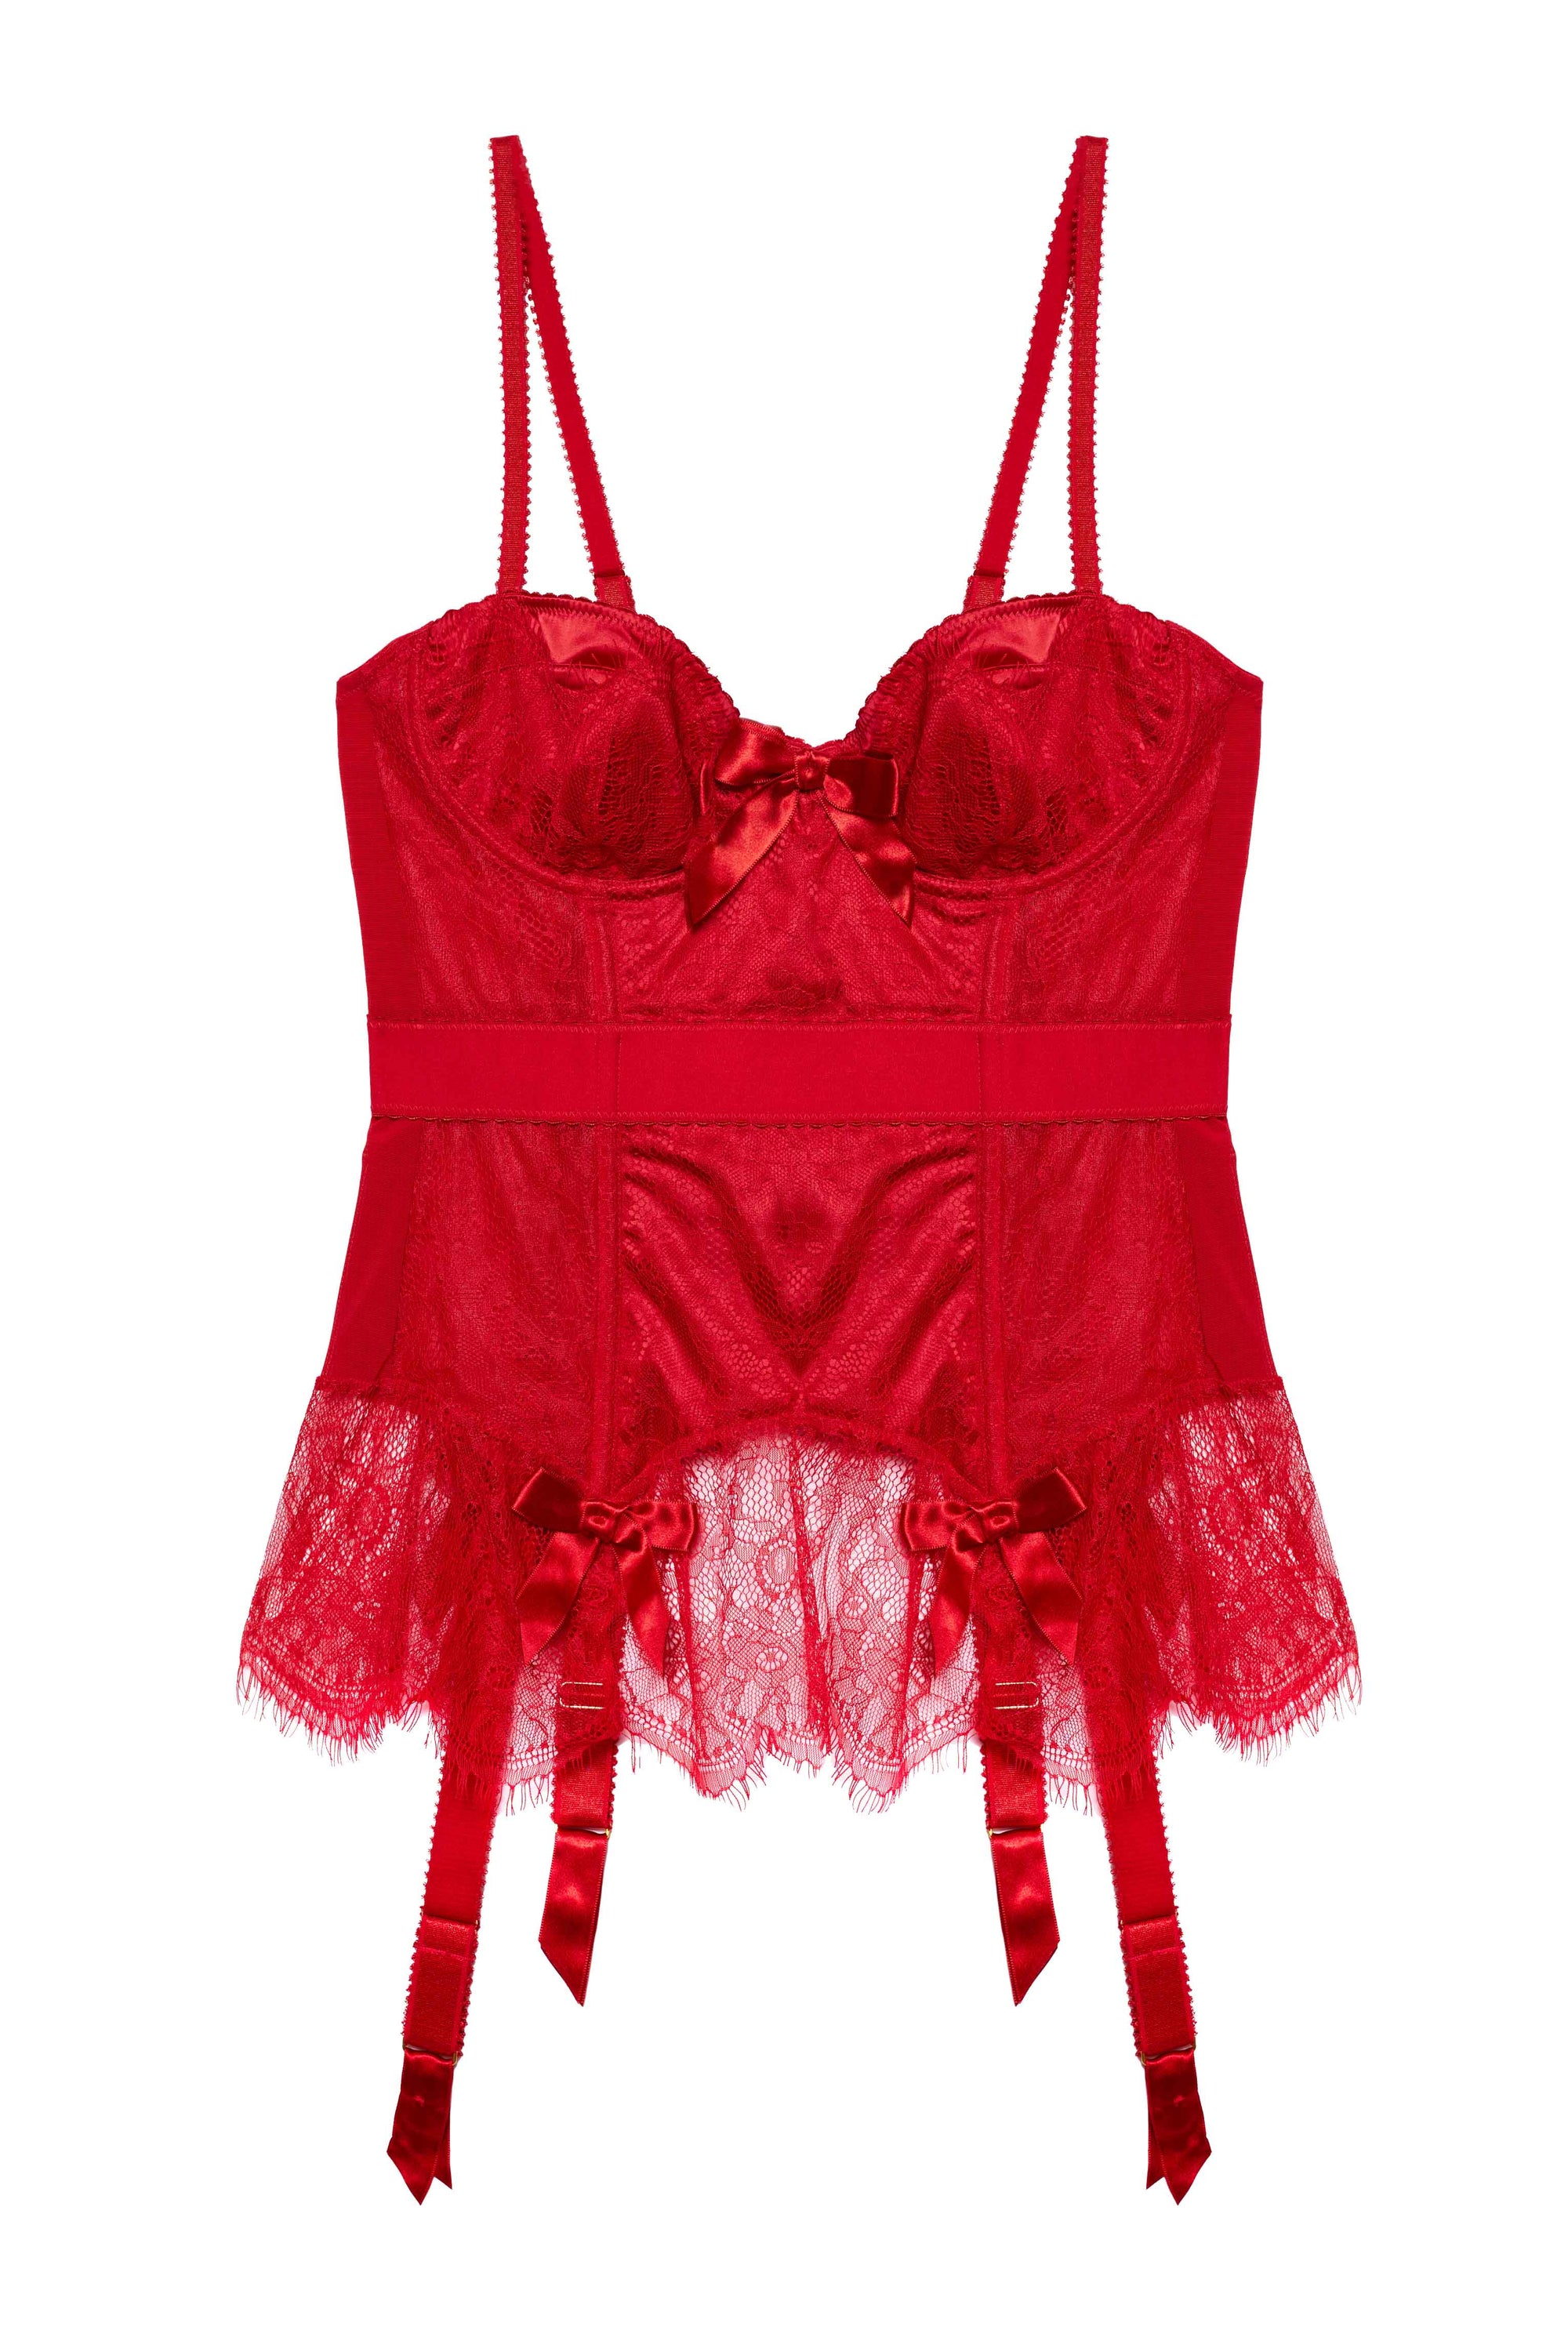 Tempest Lace Basque With Bows Red